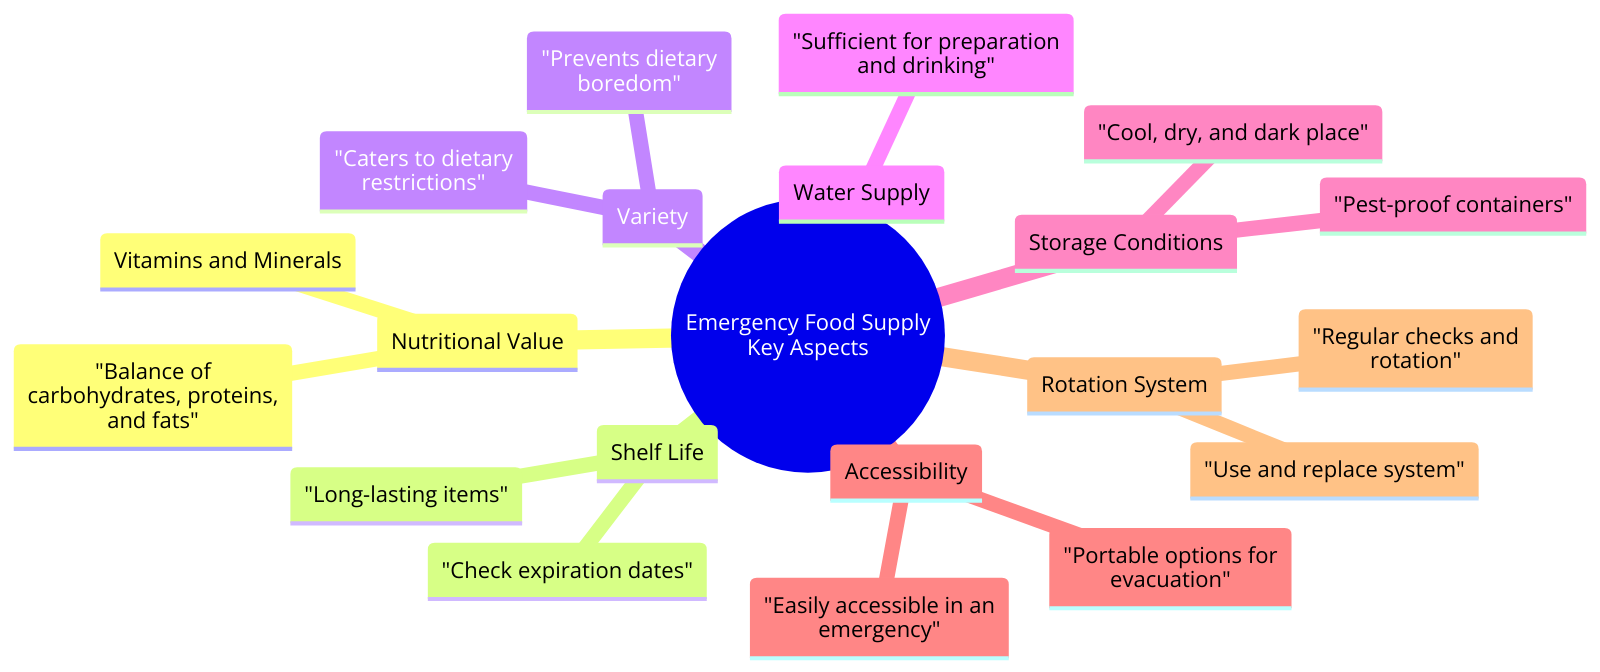 the most important aspects when making an emergency food supply